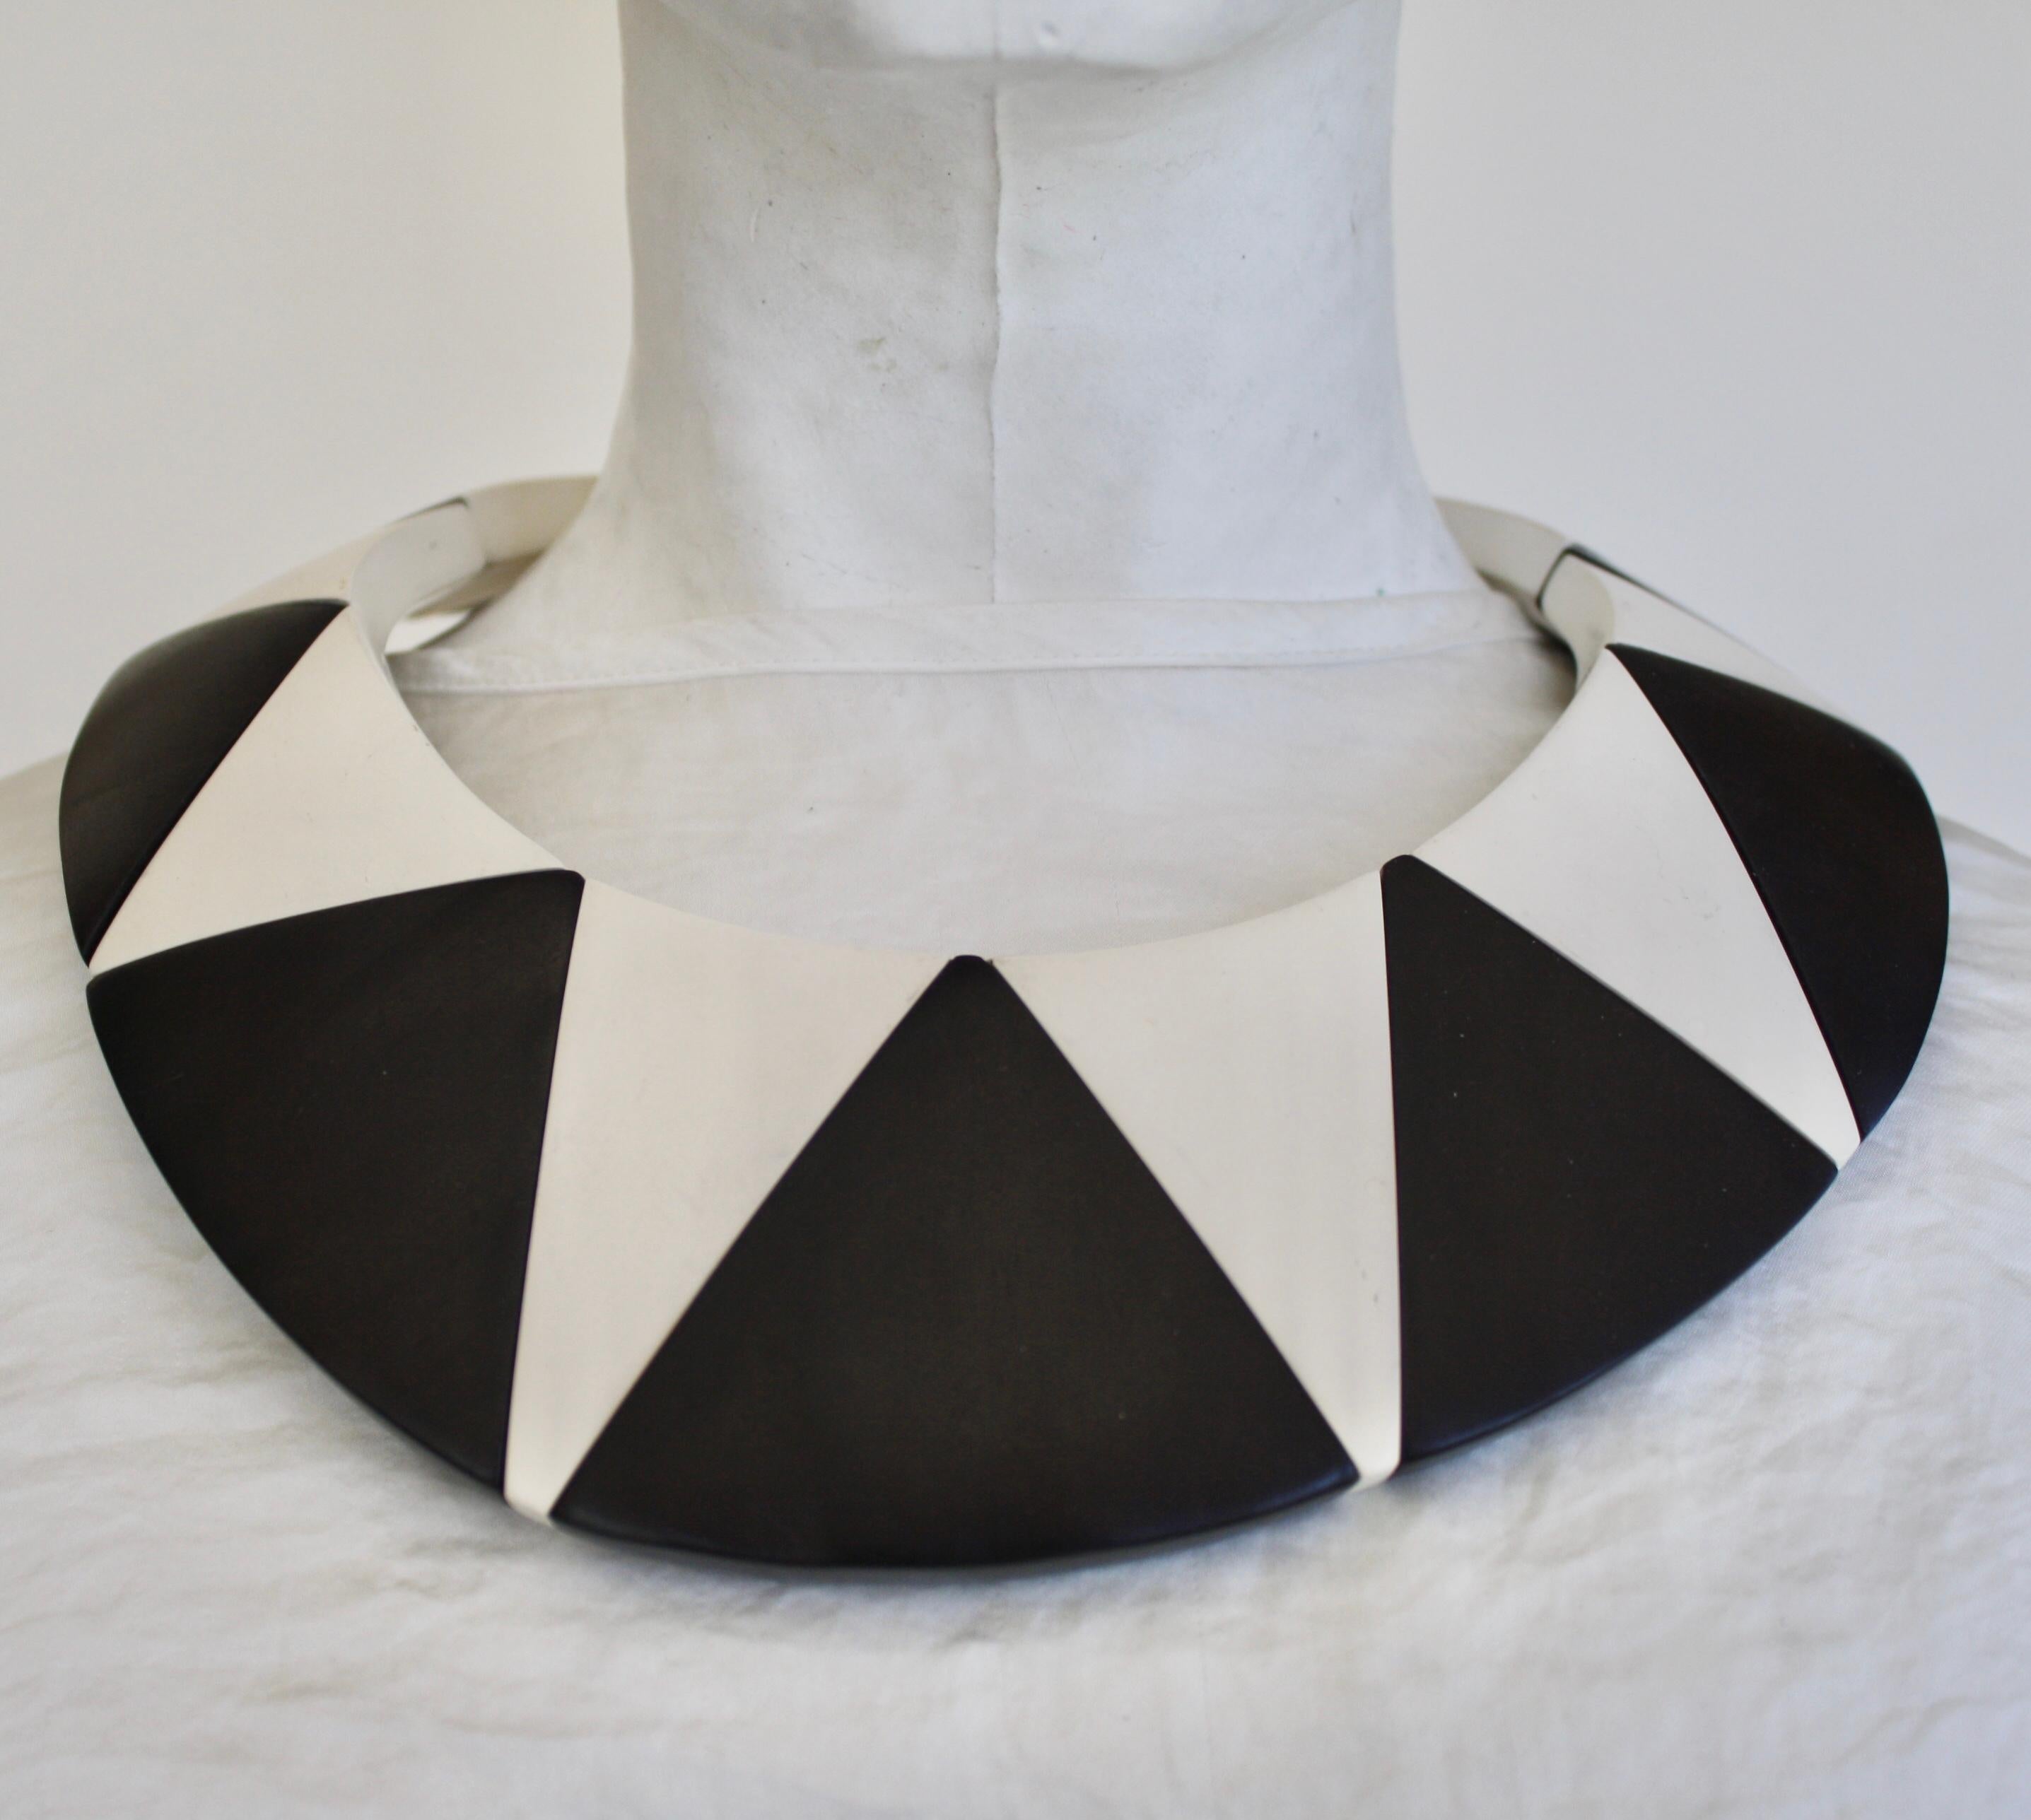 Collar necklace made with ebony wood and polyester with magnetic closure from Monies Denmark. Circumference is 5.5